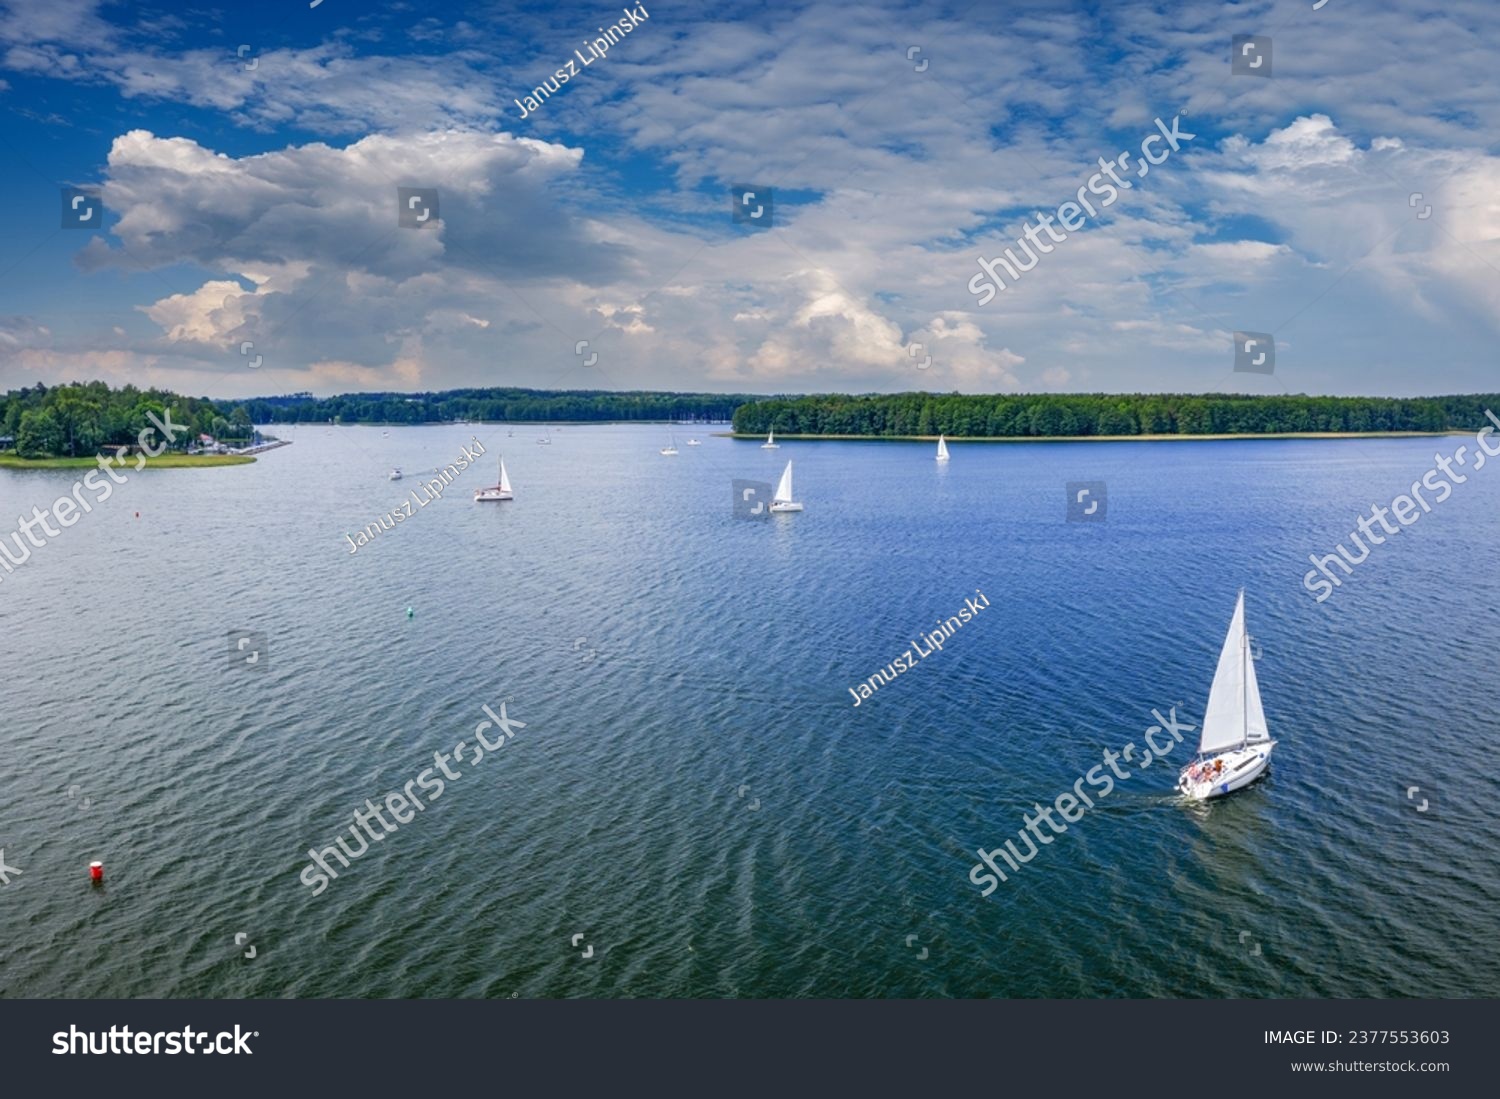 Masuria - the land of a thousand lakes in north-eastern Poland #2377553603